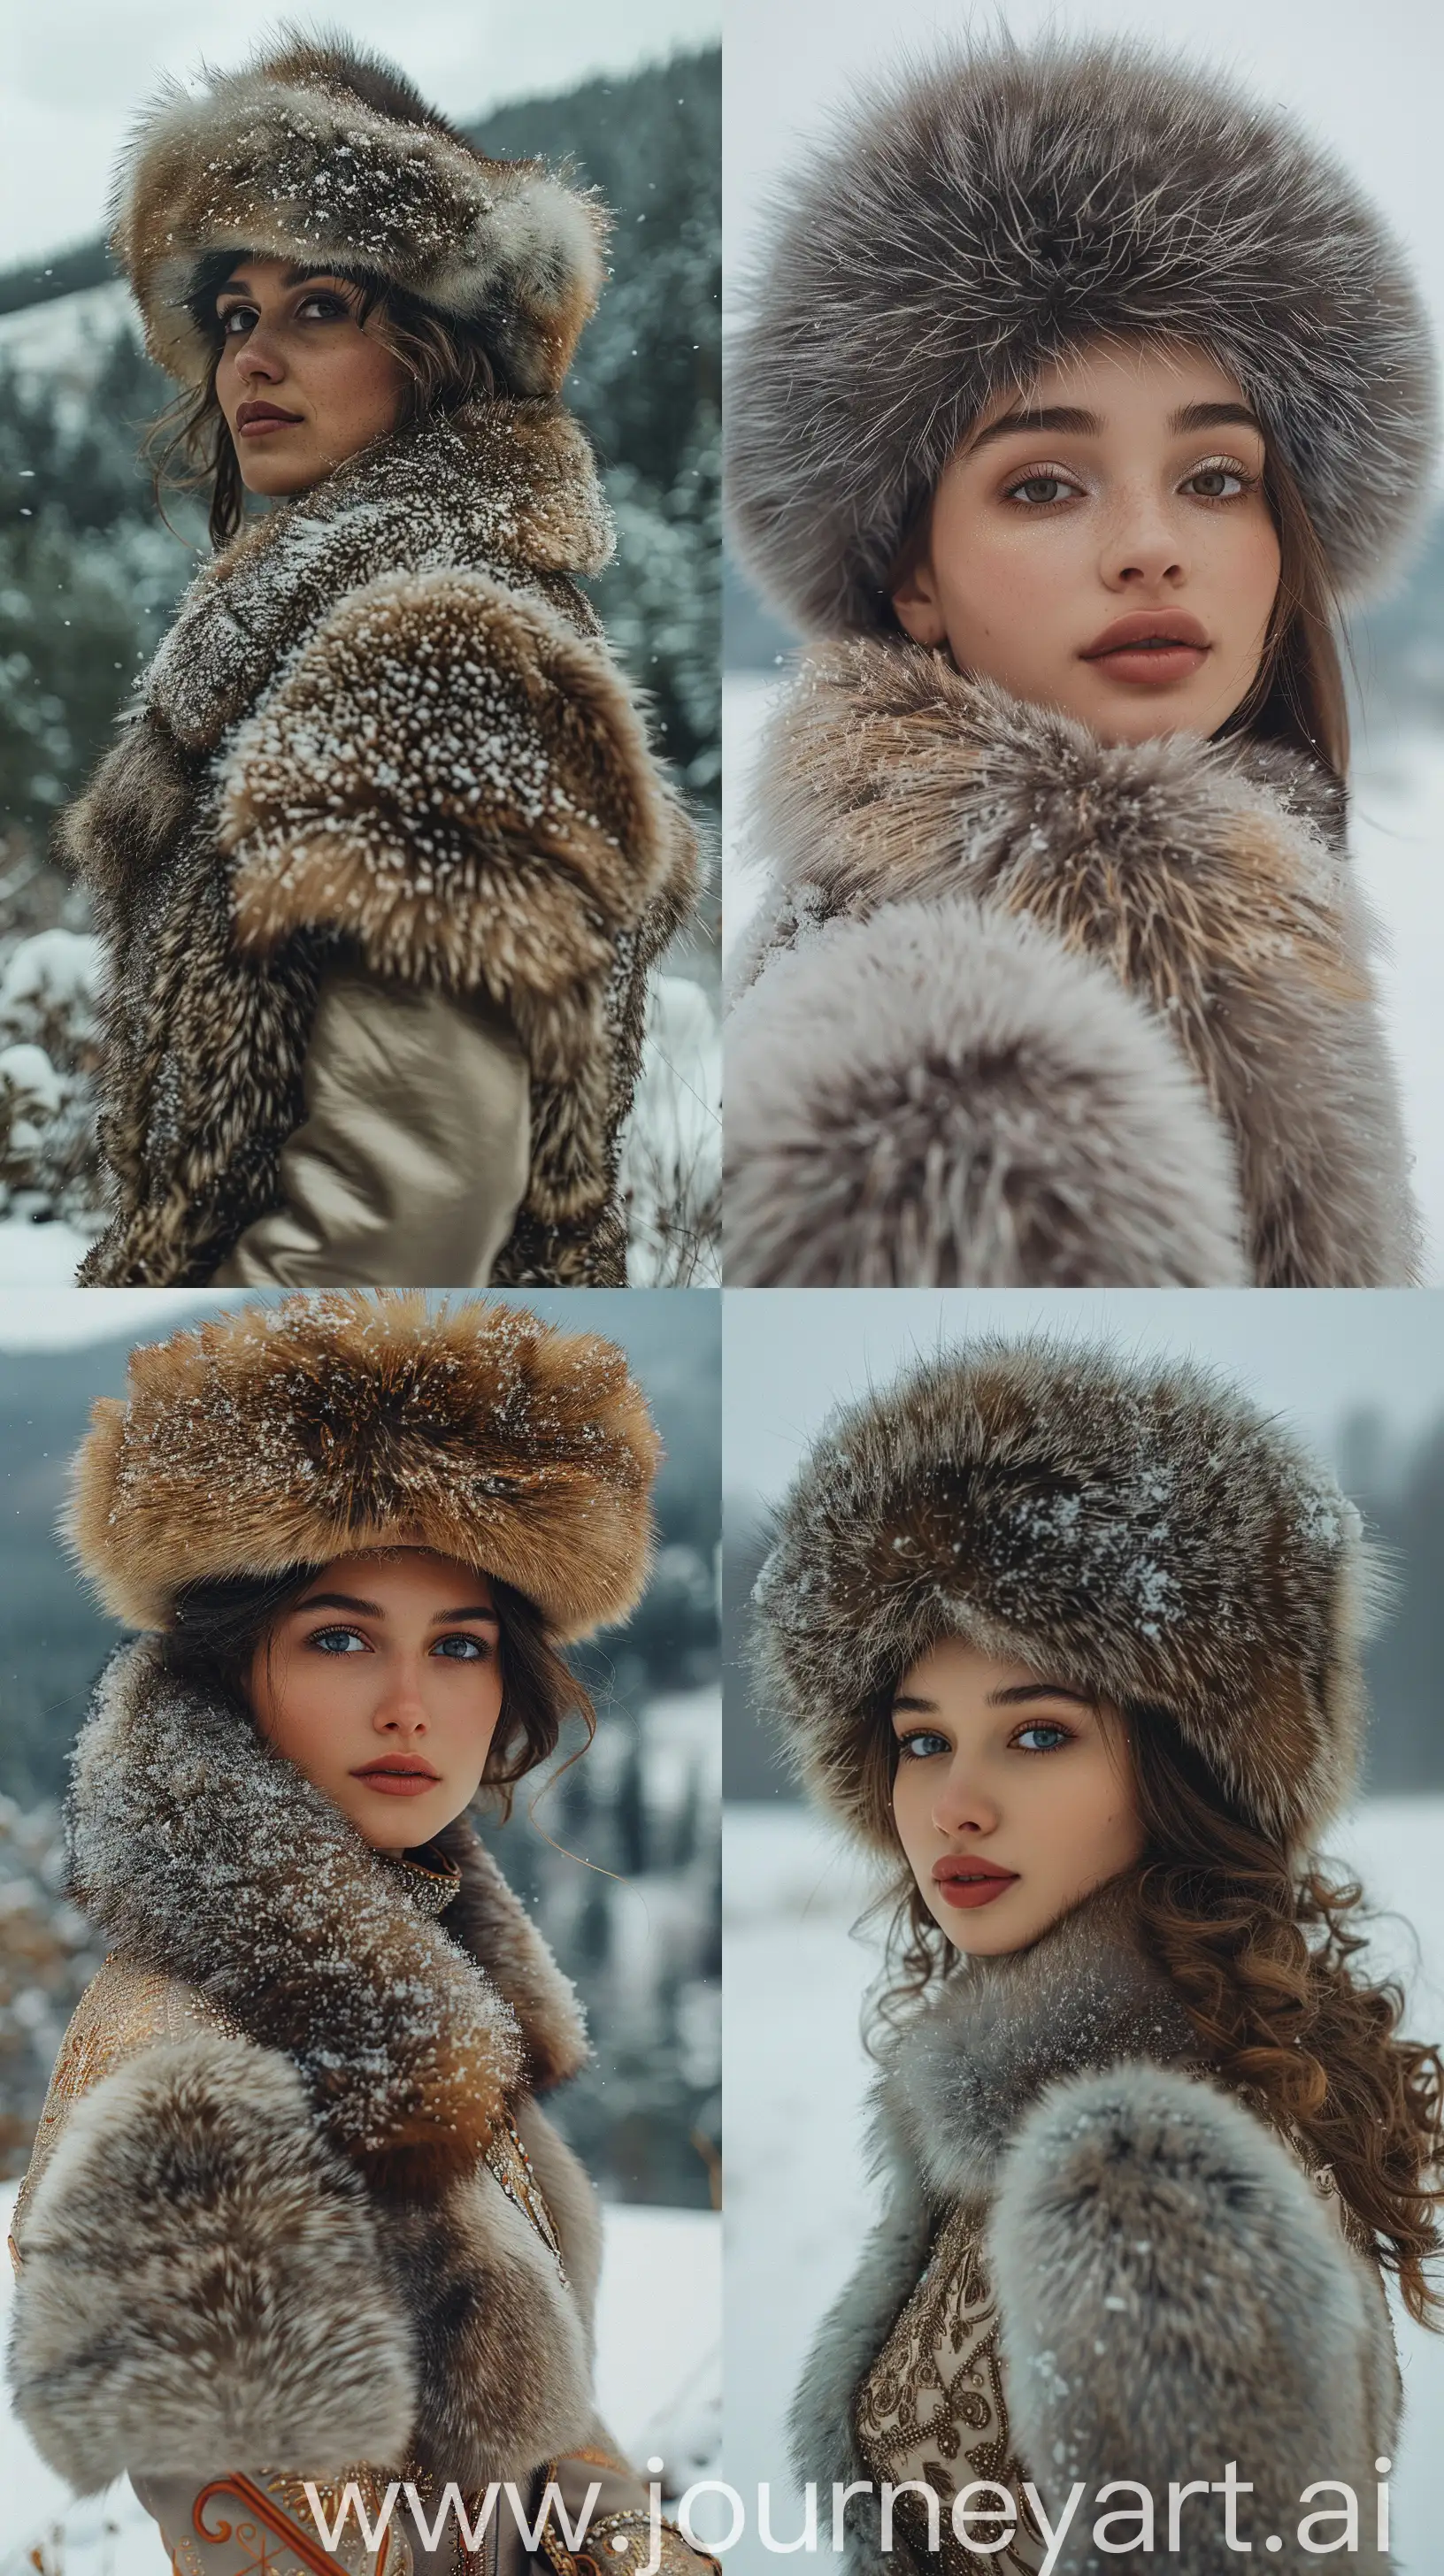 Stylish-Slavic-Girl-in-Luxurious-Fur-Coat-amidst-Snowy-Ural-Mountains